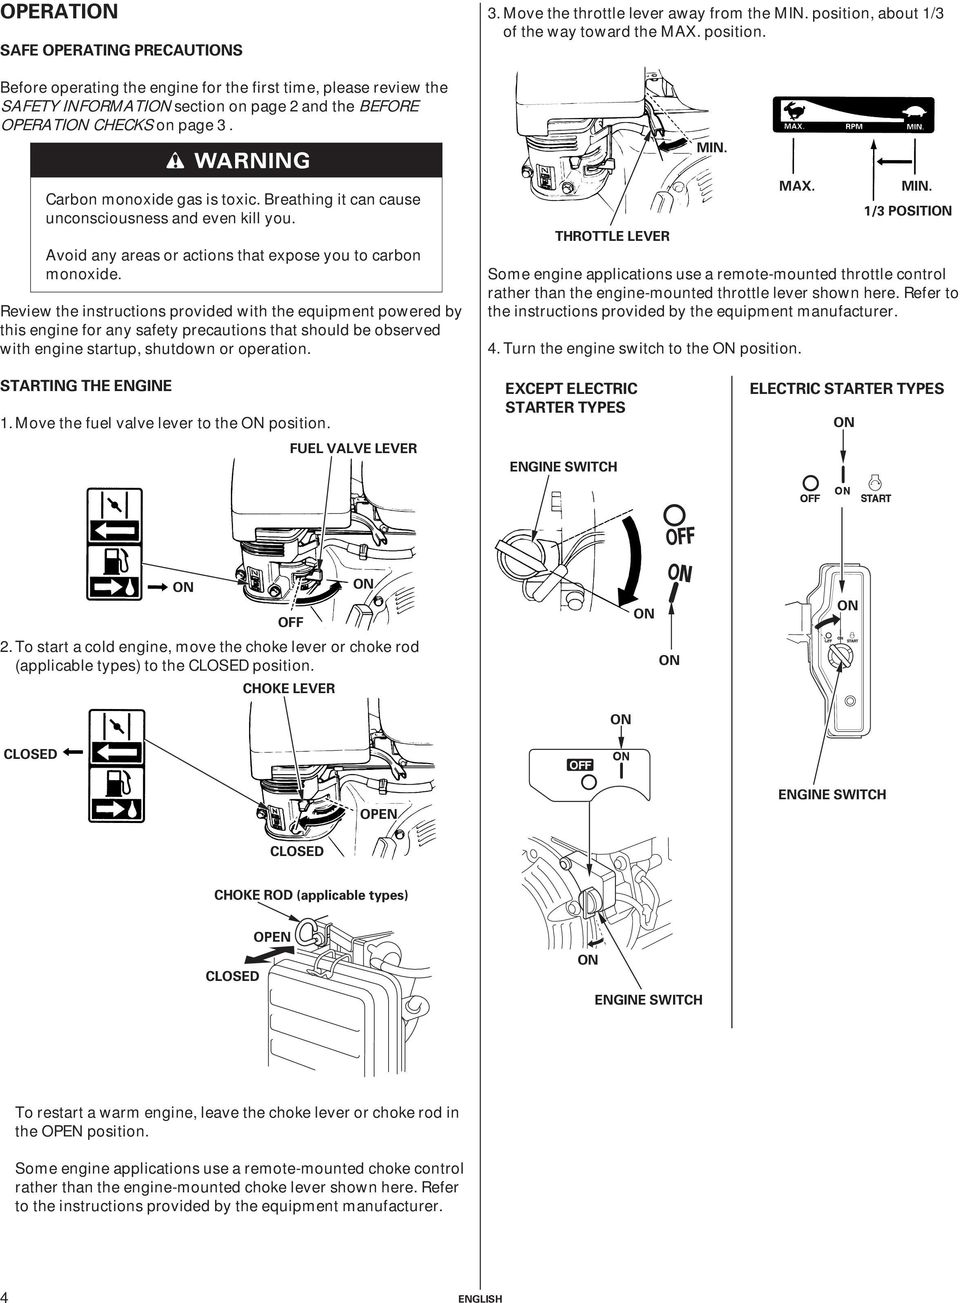 Review the instructions provided with the equipment powered by this engine for any safety precautions that should be observed with engine startup, shutdown or operation. 3.